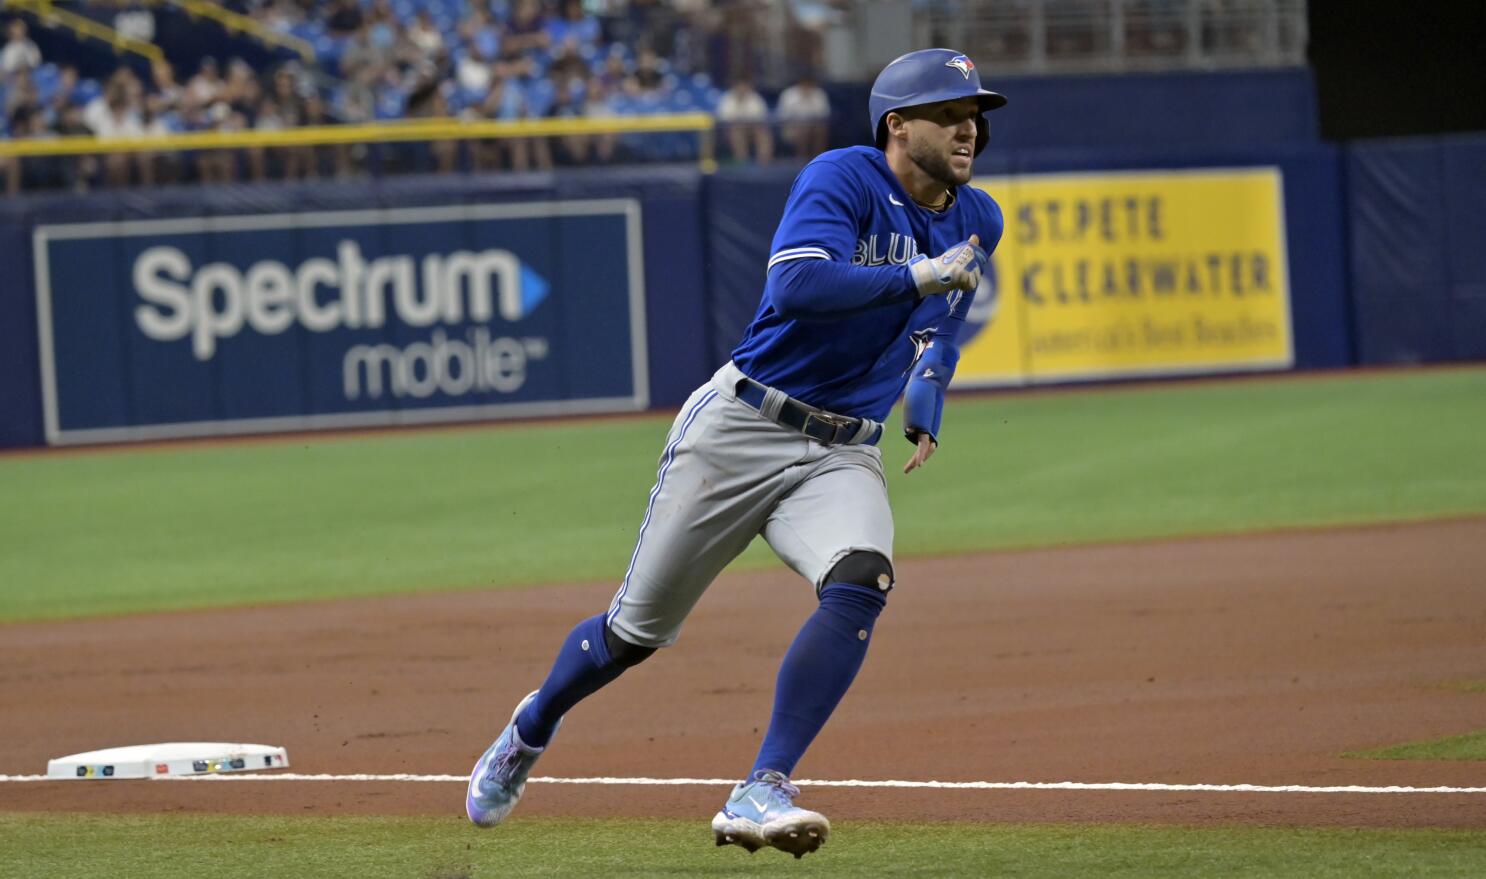 Blue Jays rout Rays 20-1 as Guerrero Jr has 6 RBIs, position players give  up 10 runs - The San Diego Union-Tribune